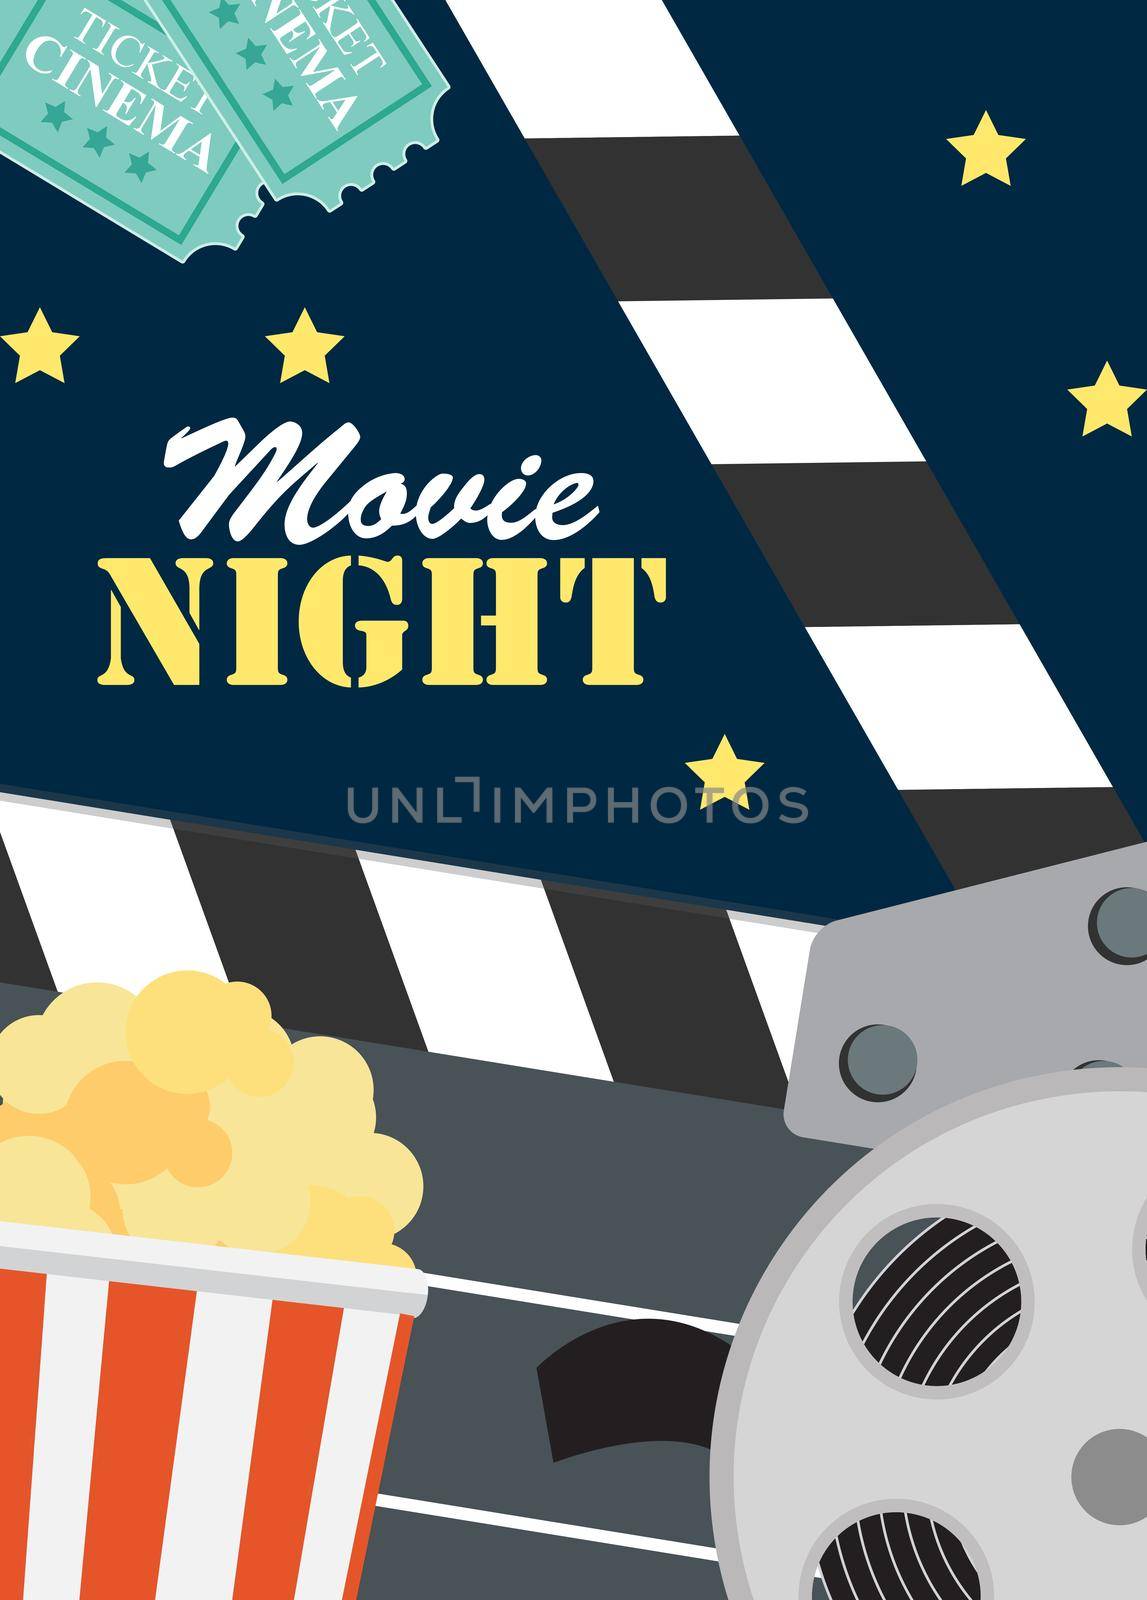 Abstract Movie Night Cinema Flat Background with Reel, Old Style Ticket, Big Pop Corn and Clapper Symbol Icons. Vector Illustration EPS10